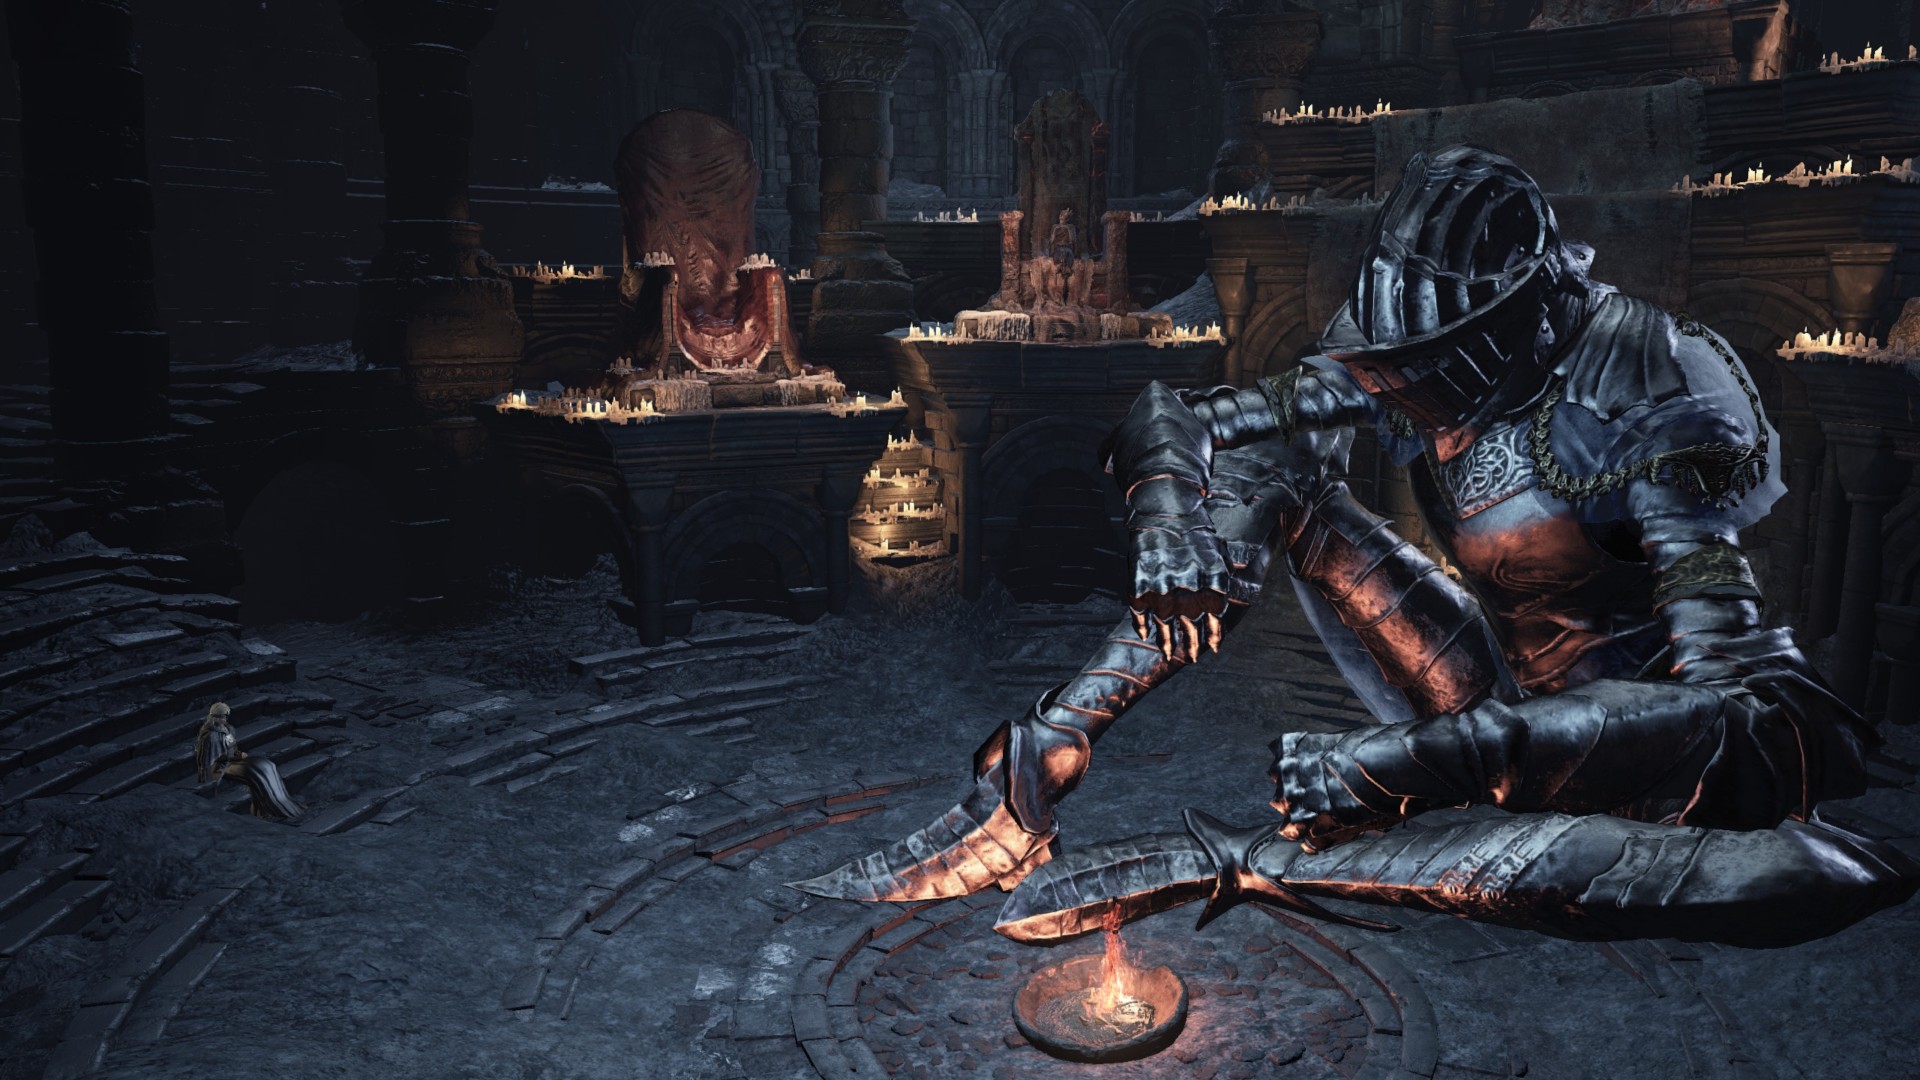 Test Yourself With This Comprehensive Dark Souls 3 Challenge Mod